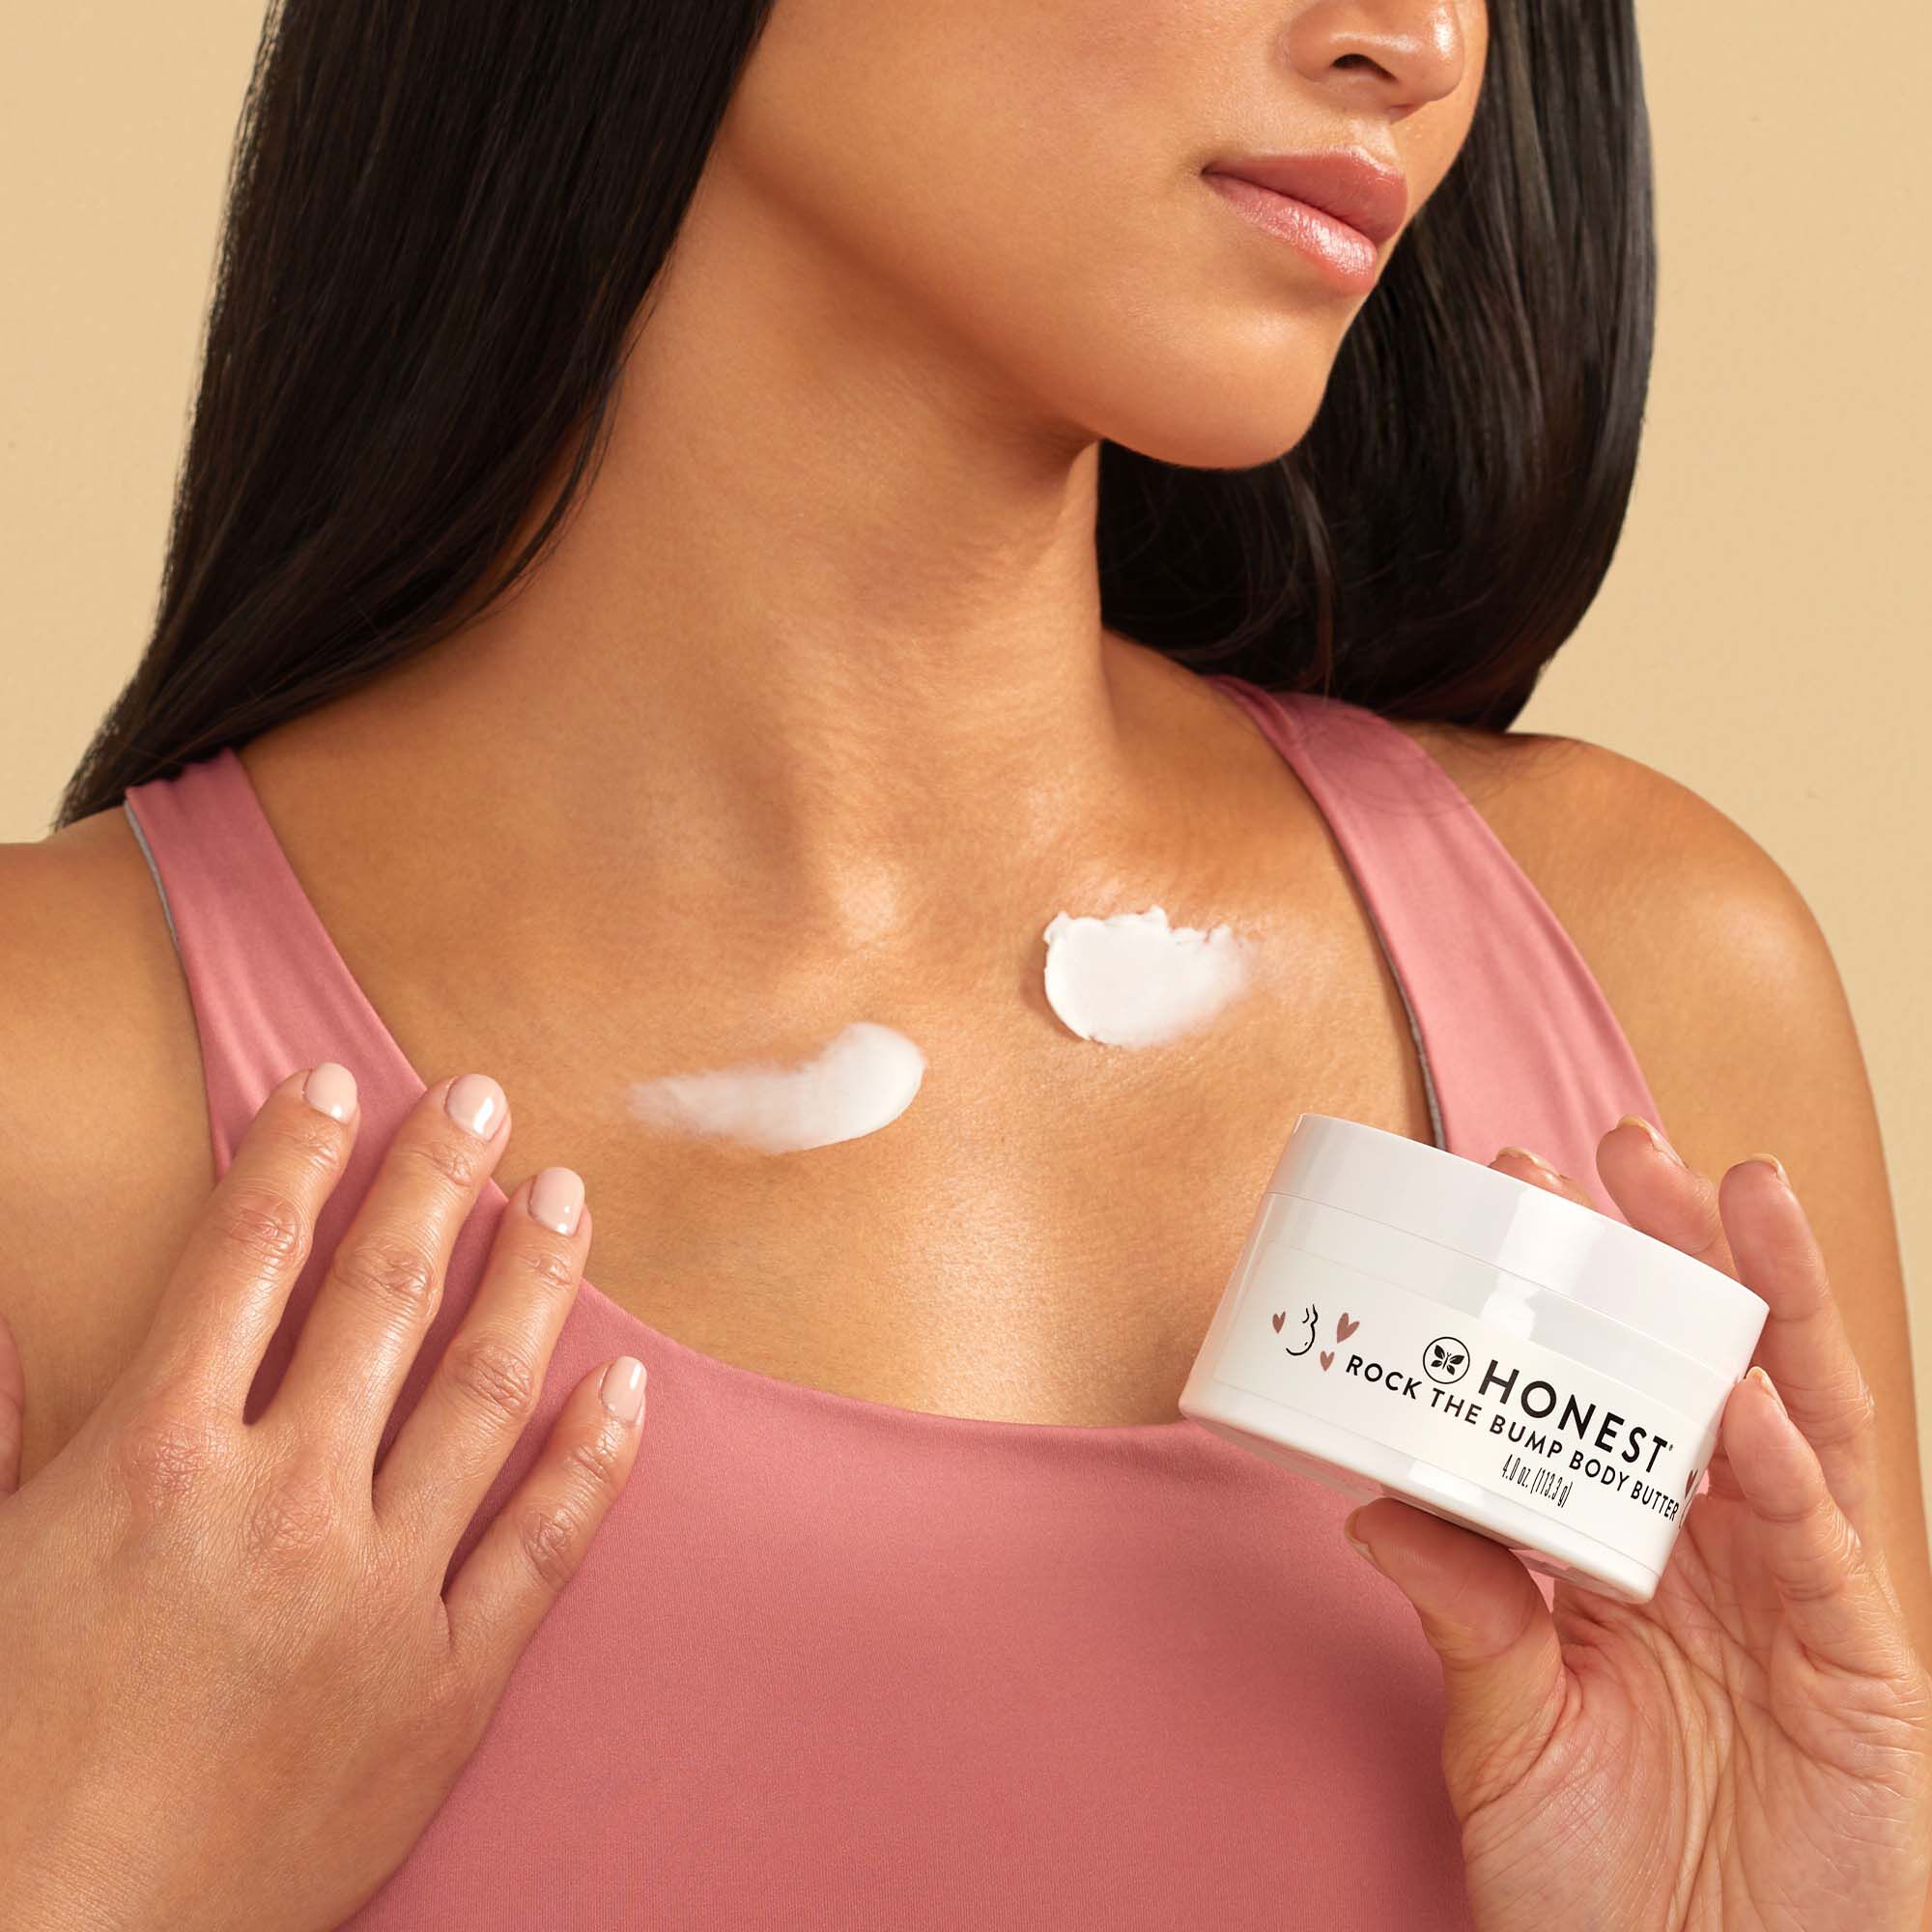 Stretch Mark Cream with Shea Butter